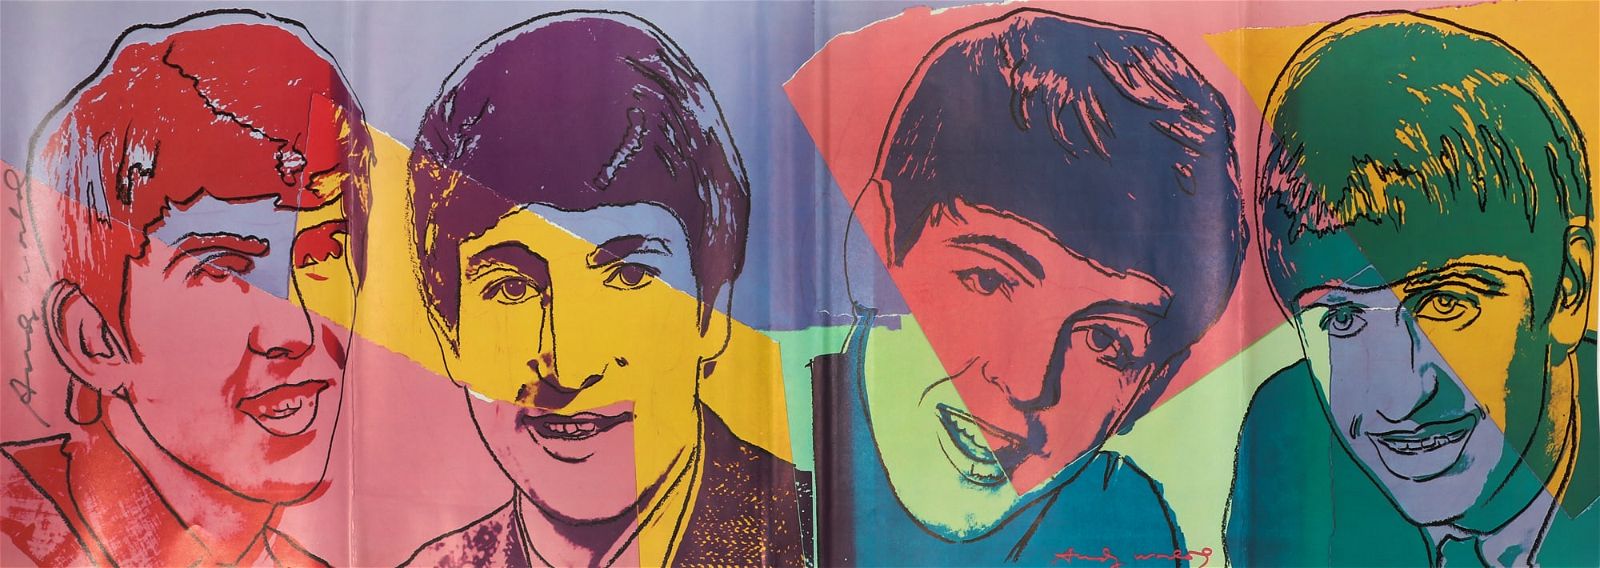 AFTER ANDY WARHOL THE BEATLES  2fb3436